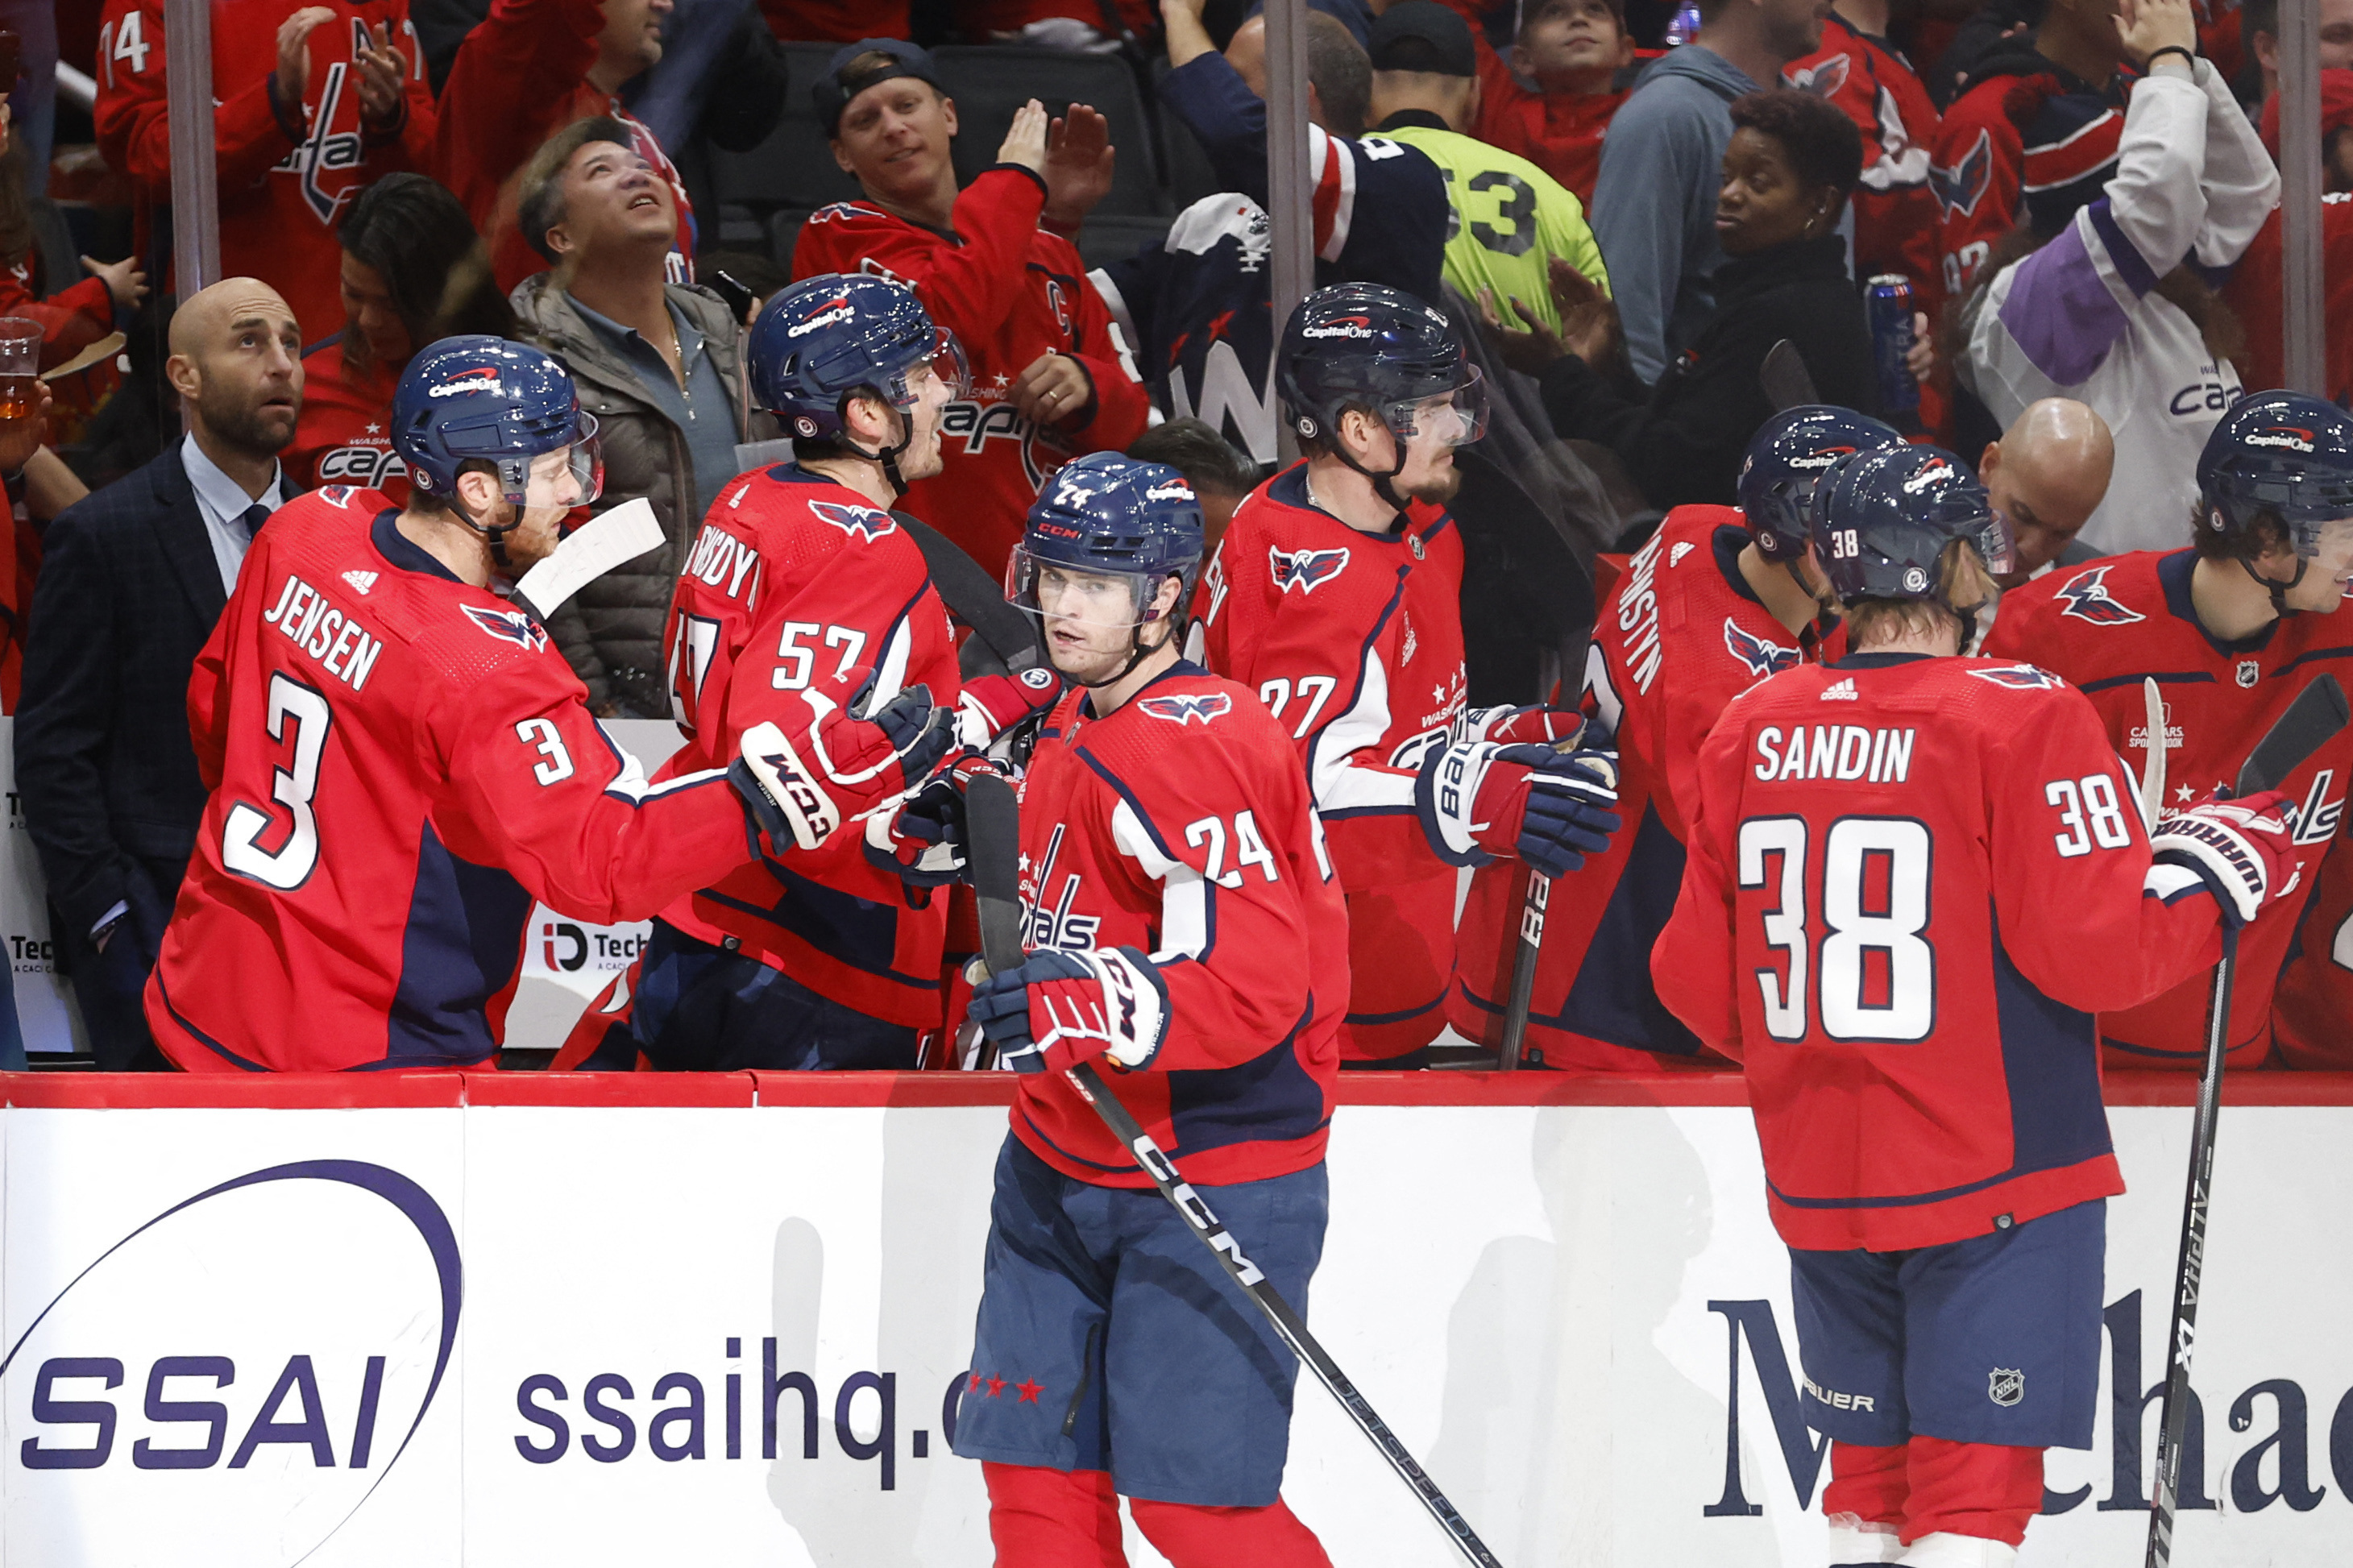 Evgeny Kuznetsov lifts Capitals past Flames in shootout | Reuters